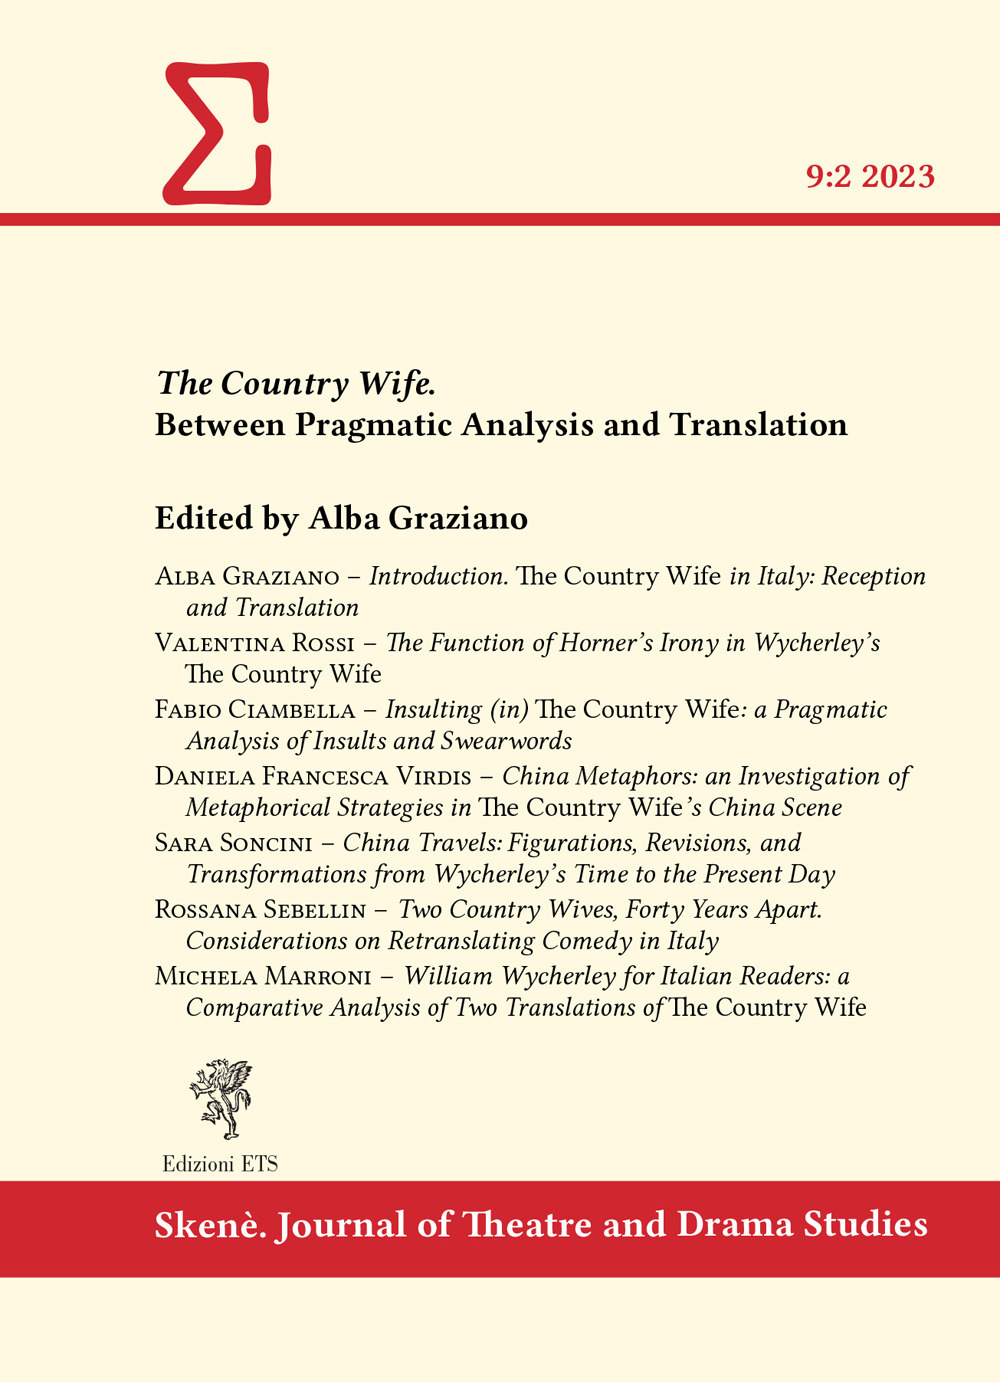 The country wife. Between pragmatic analysis and translation (2023). Vol. 2